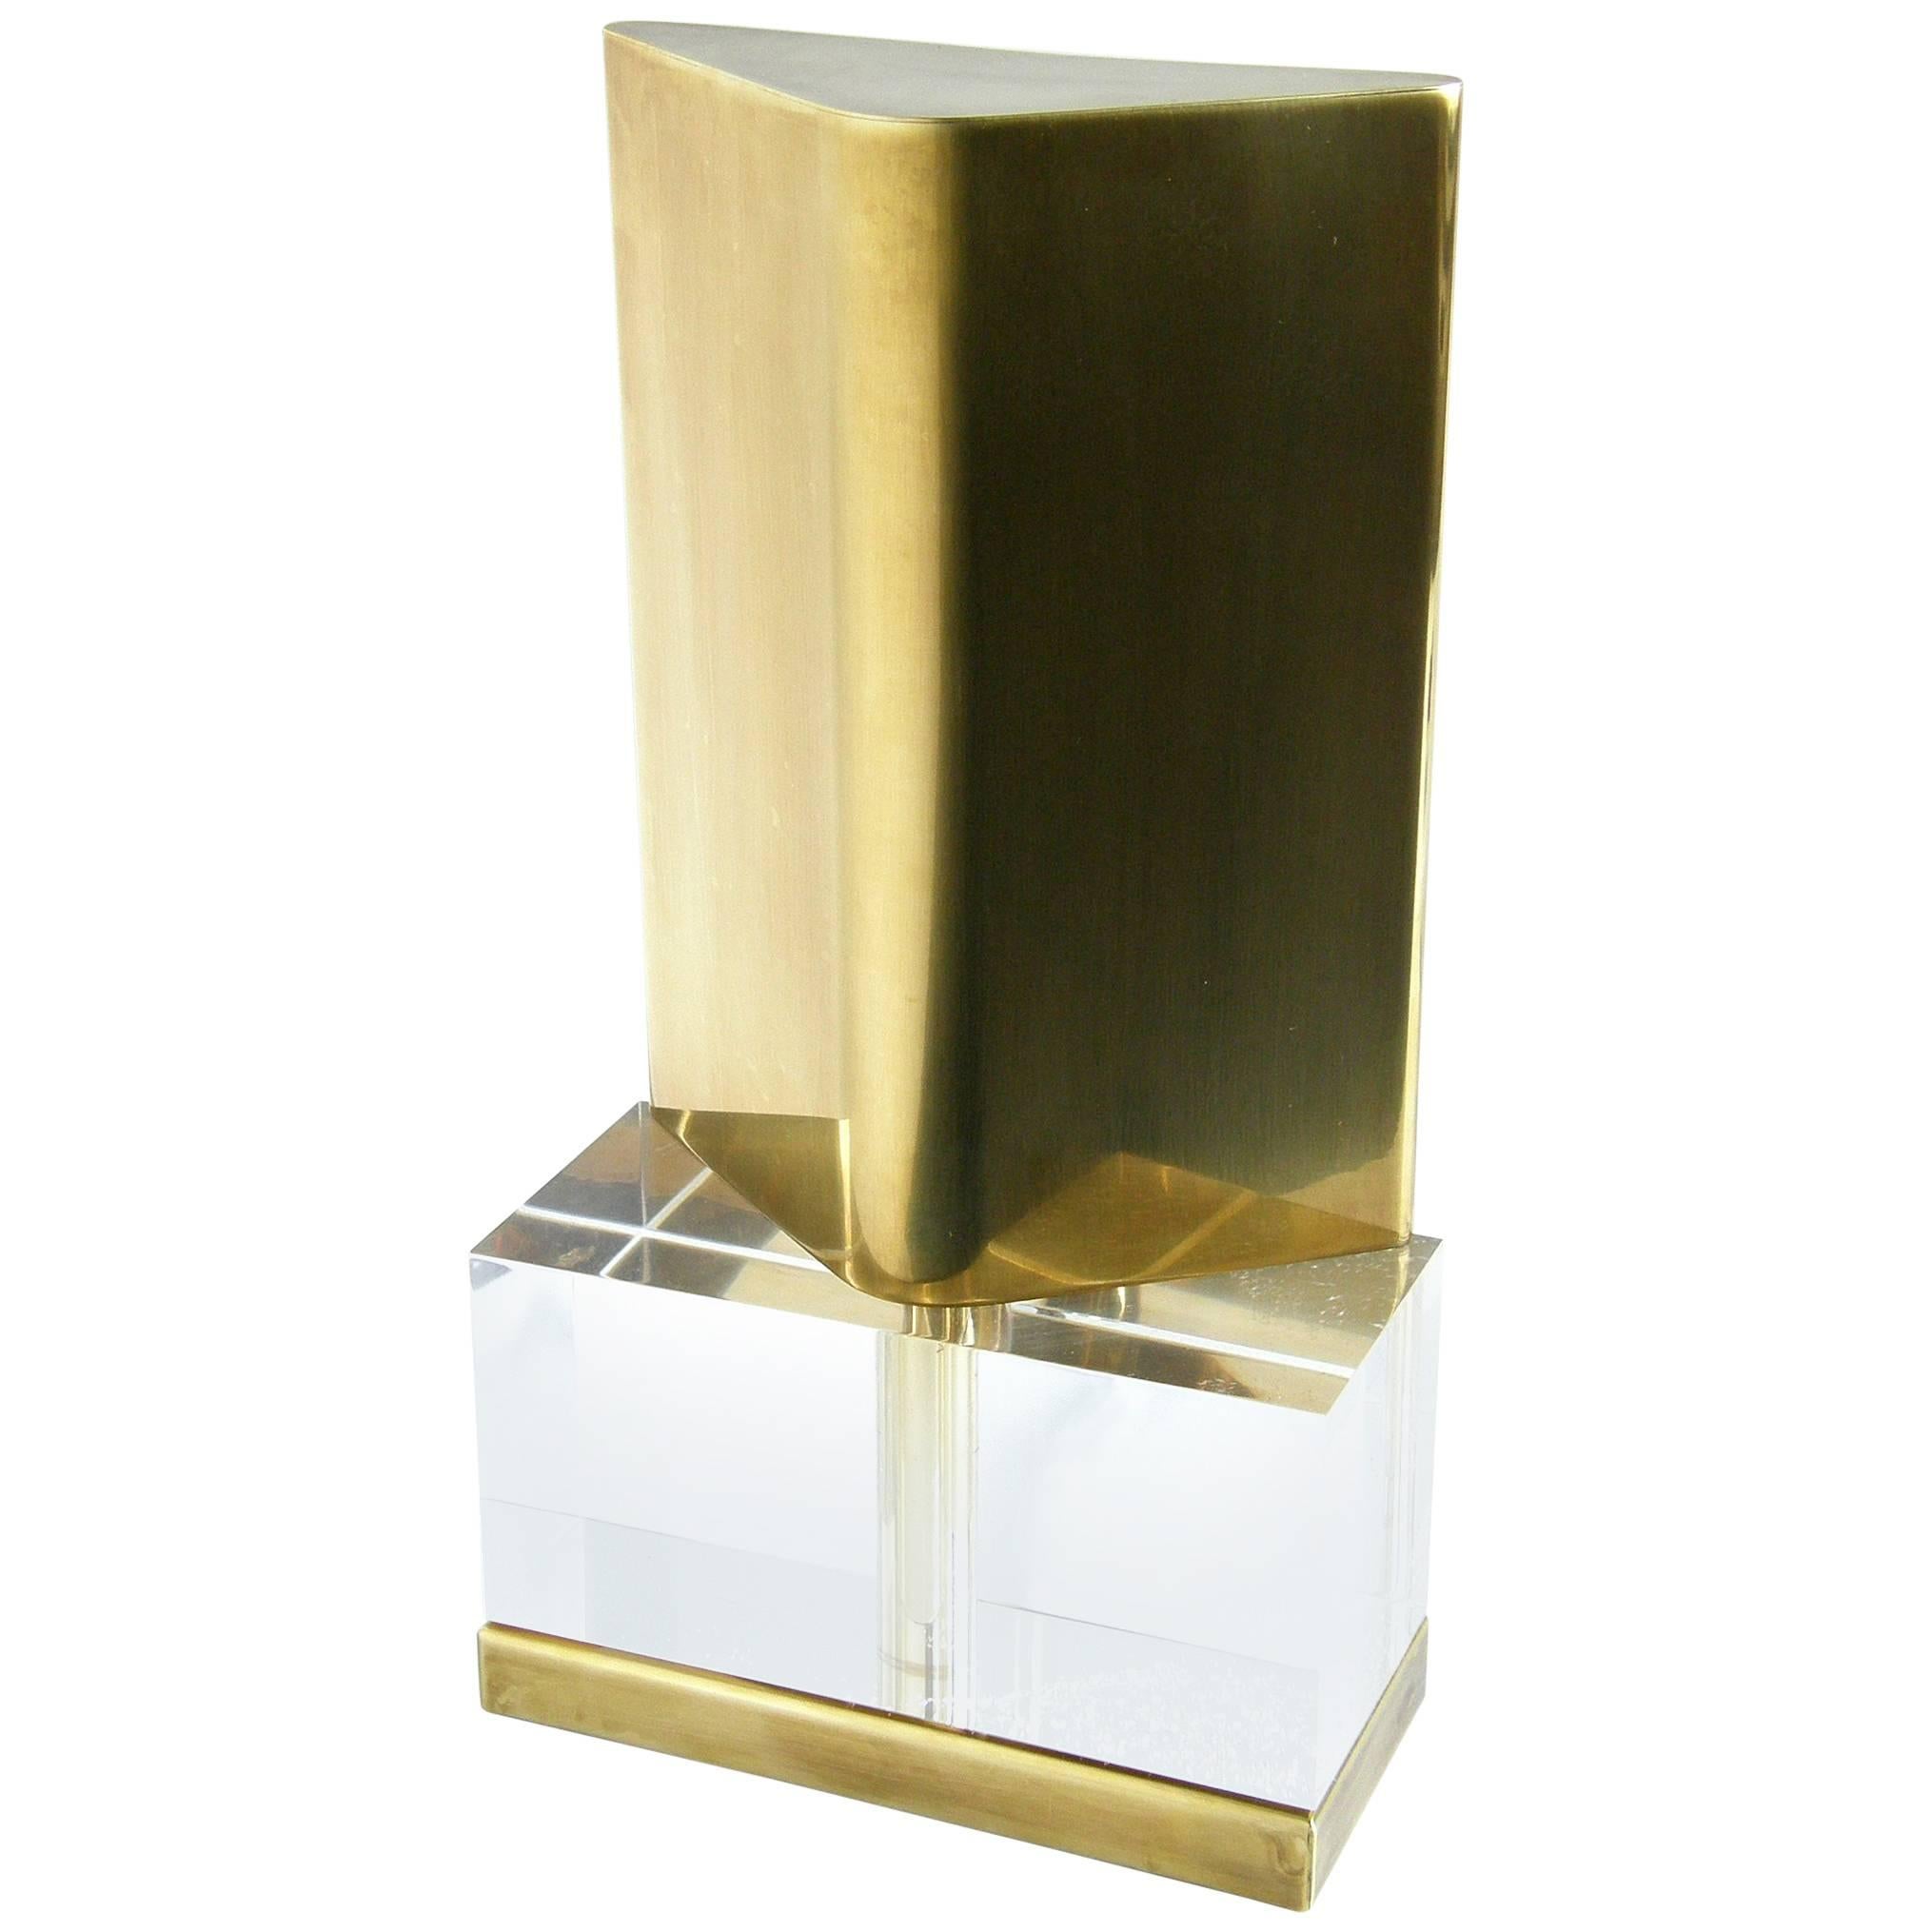 Chapman Lucite and Brass Reflector Lamp